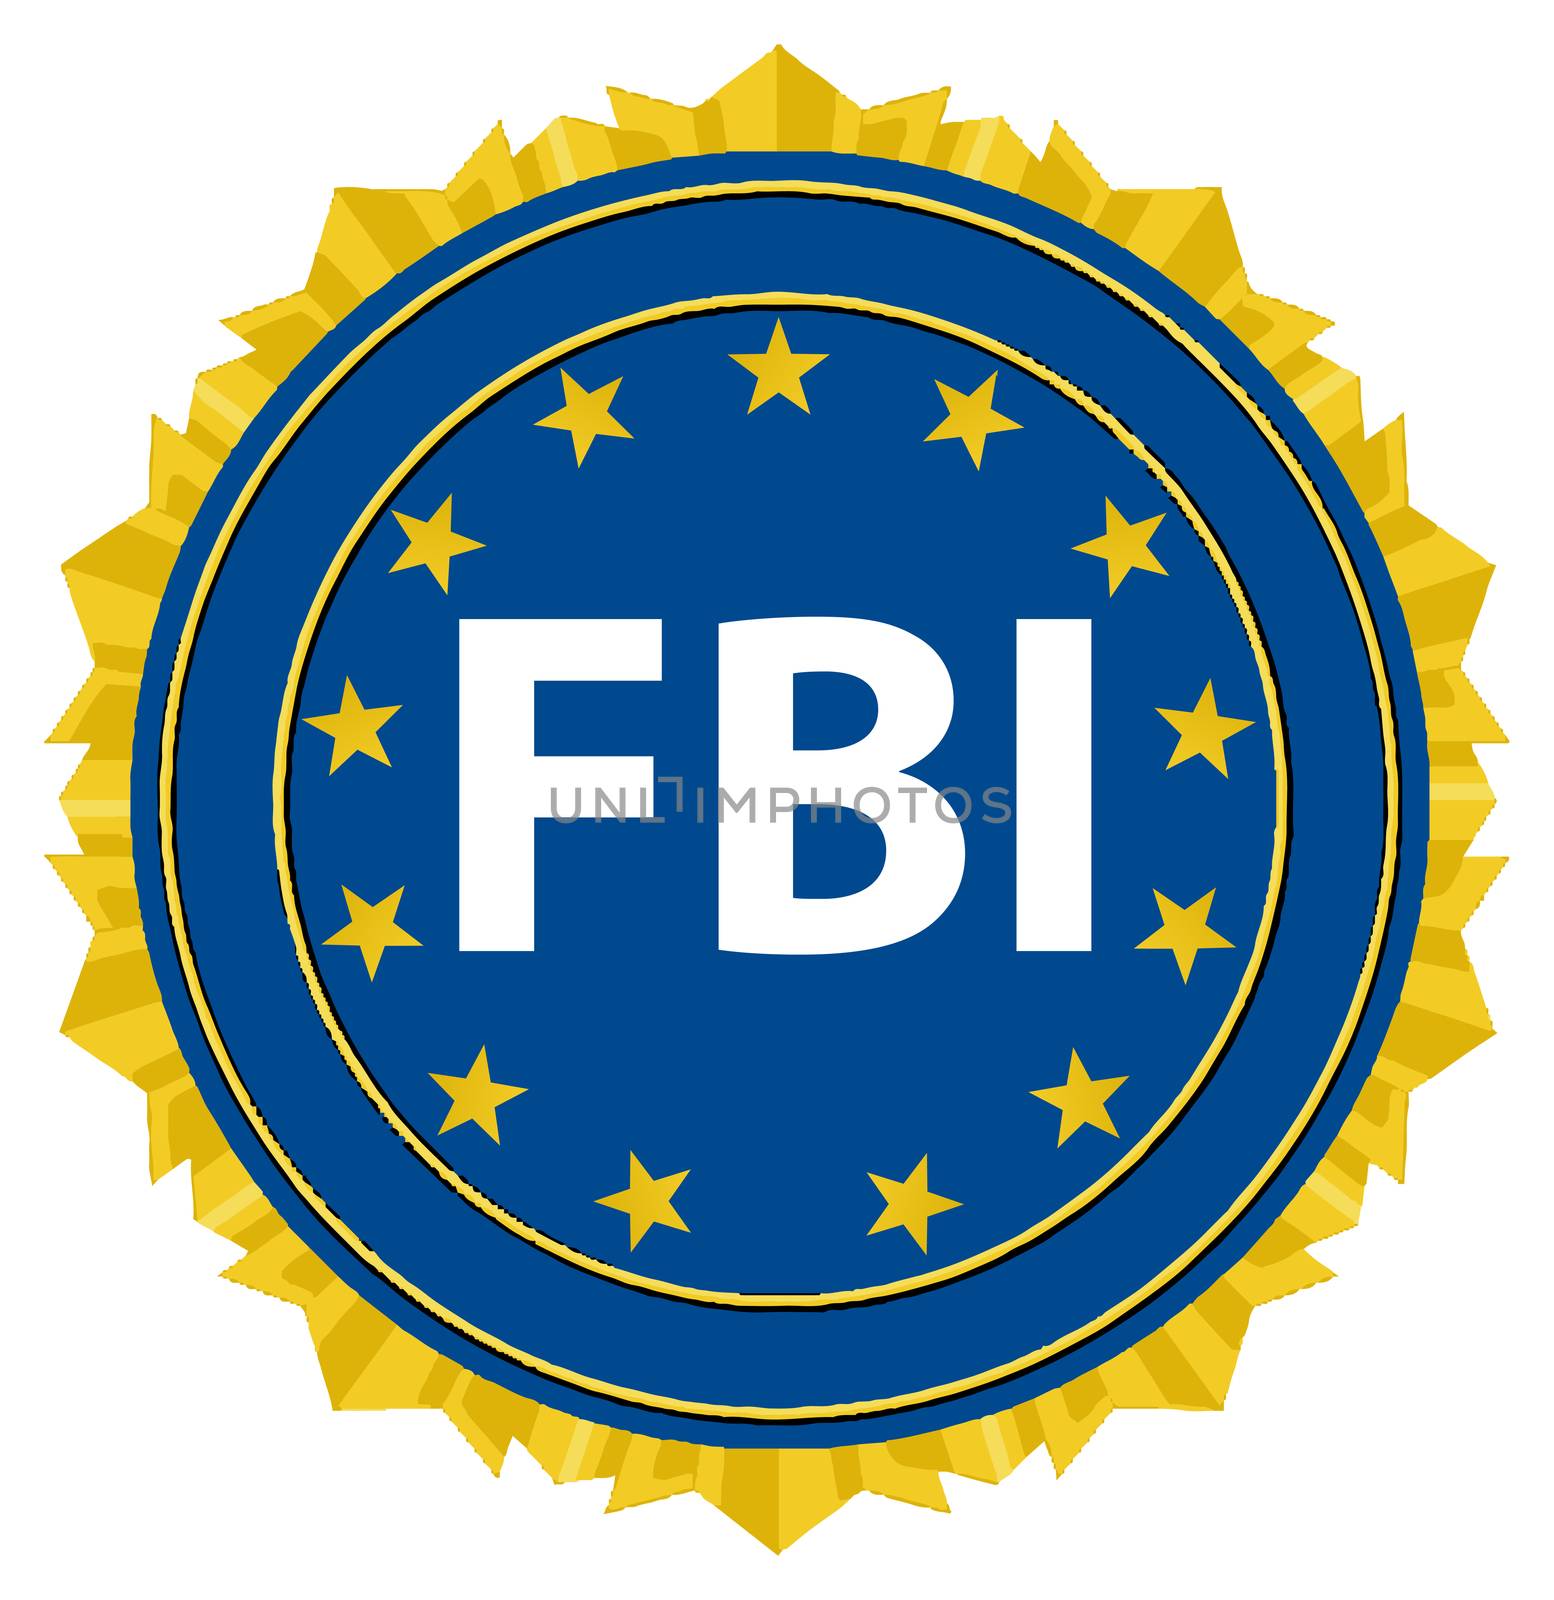 A muck up of the seal with the FBI text in the center.